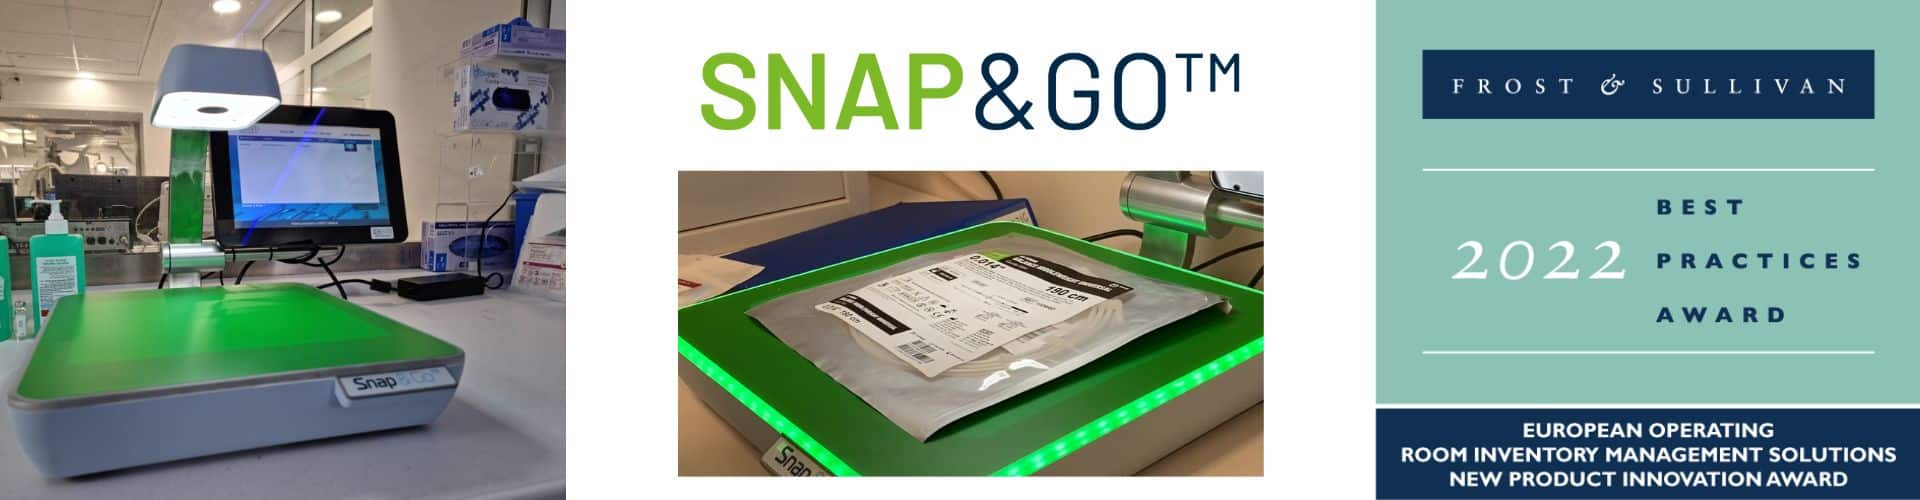 Snap & Go image recognition technology for accurate, digital utilization documentation straight to the EMR